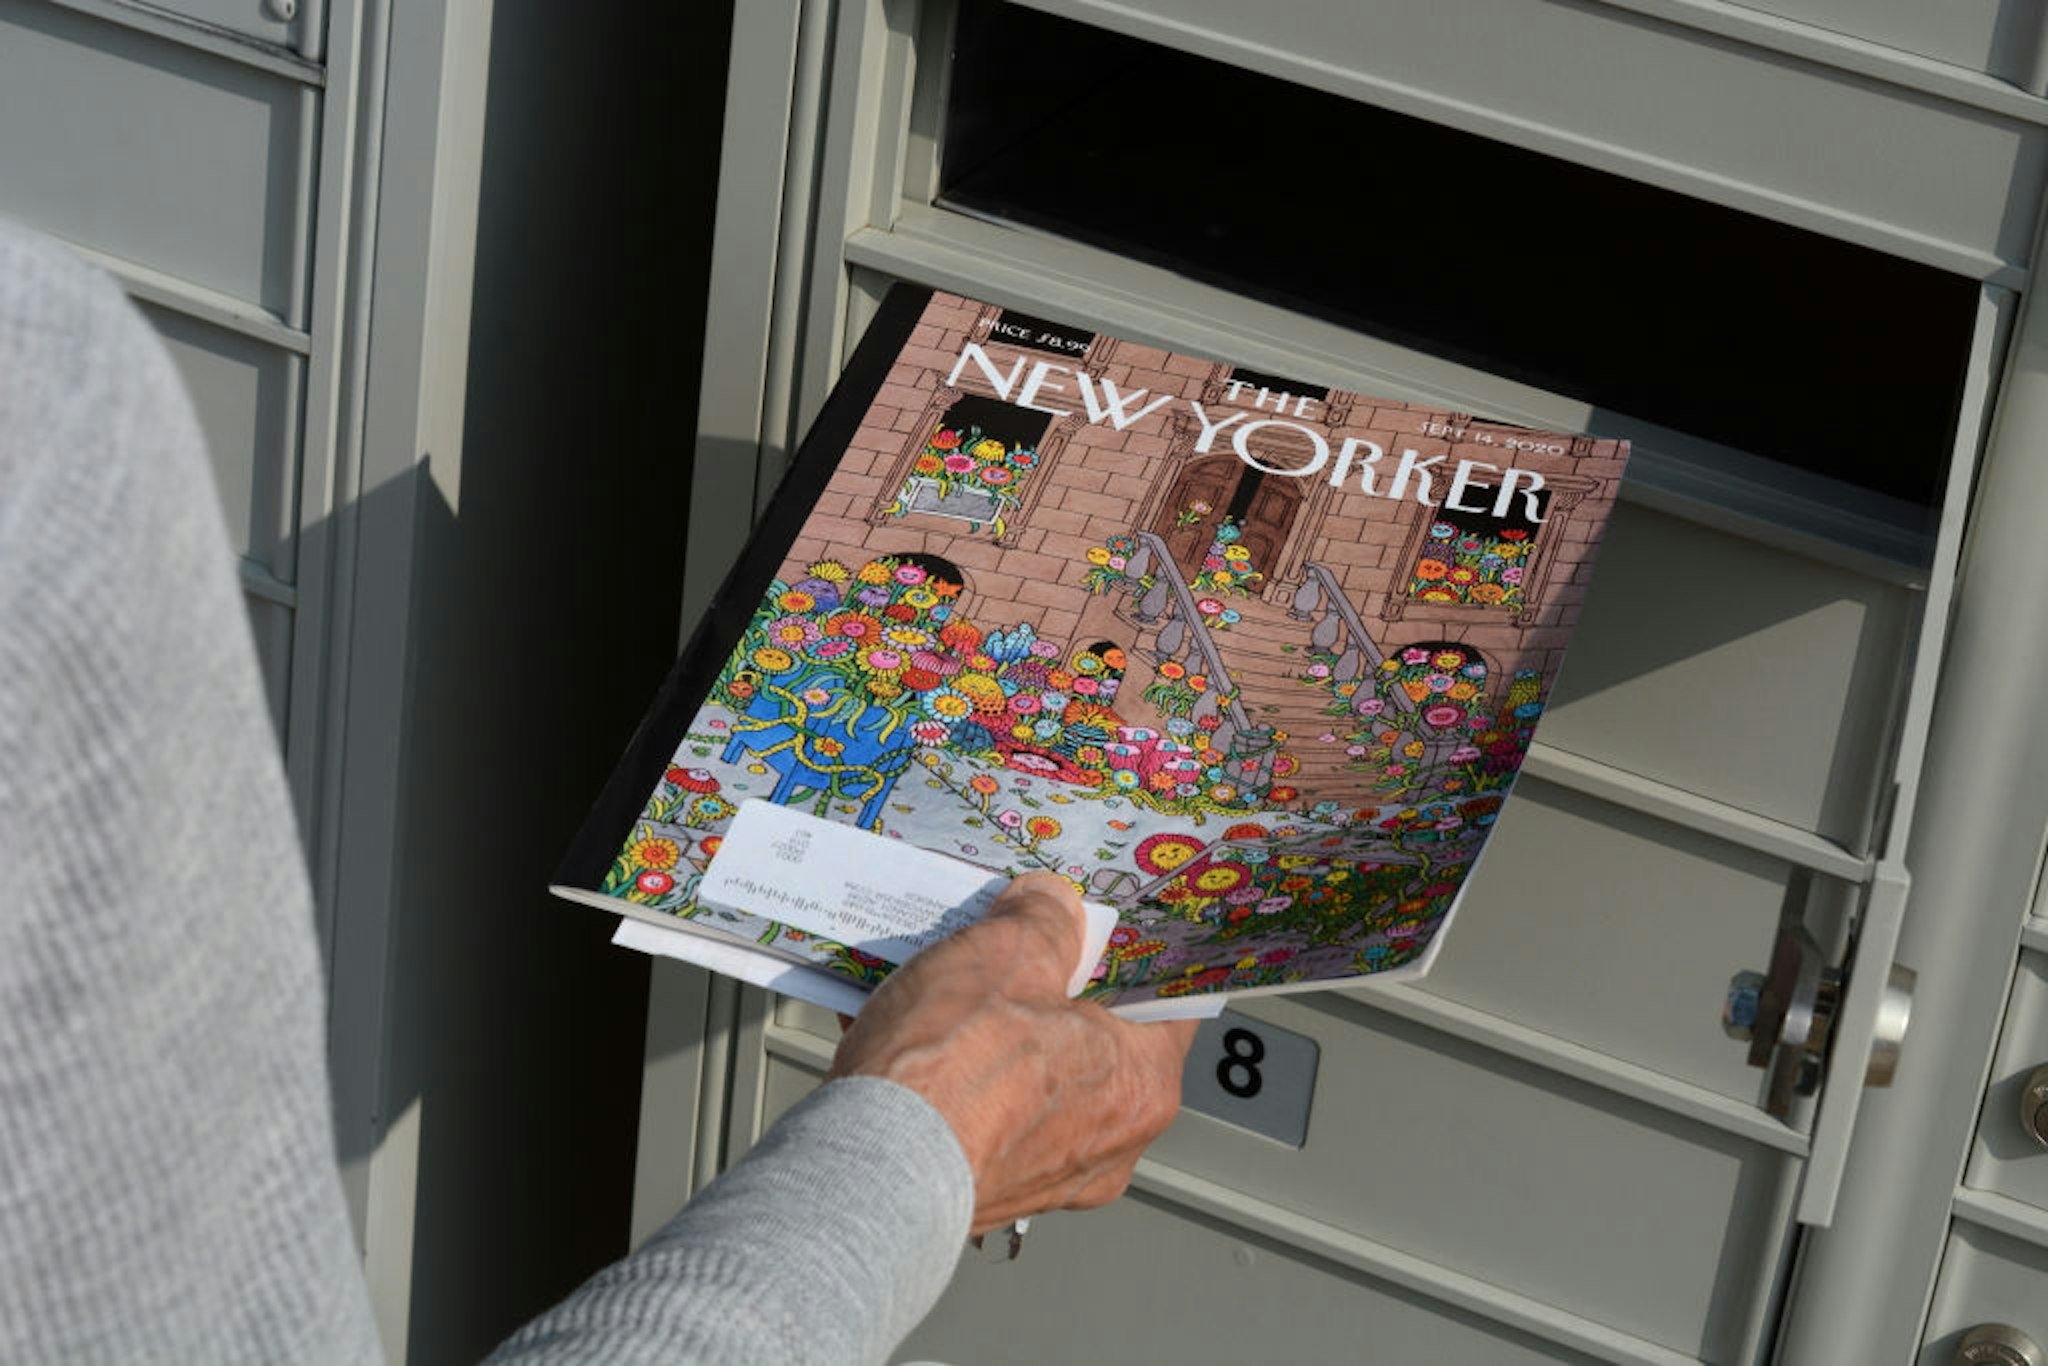 SANTA FE, NEW MEXICO - FEBRUARY 8, 2020: A woman retrieves a copy of The New Yorker magazine from her condominium cluster mailbox in Santa Fe, New Mexico.